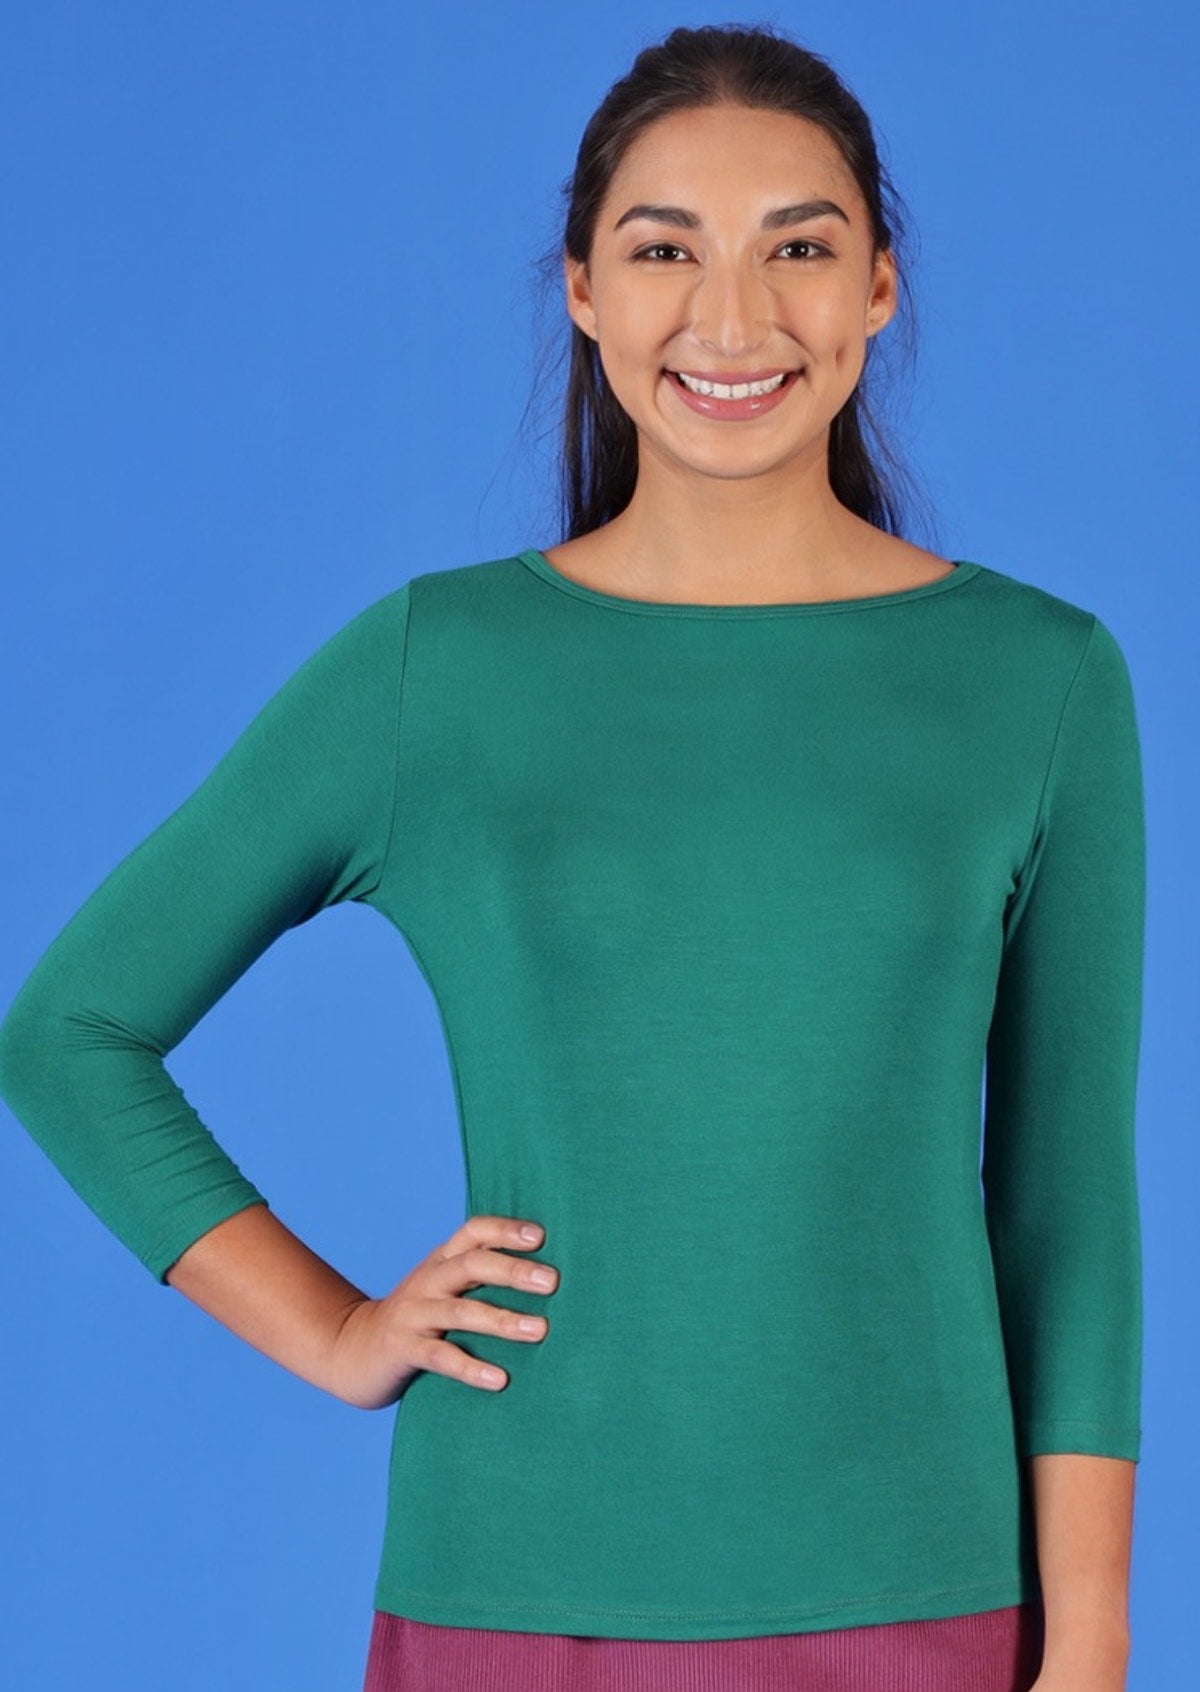 Woman wearing a rayon boat neck green 3/4 sleeve top.